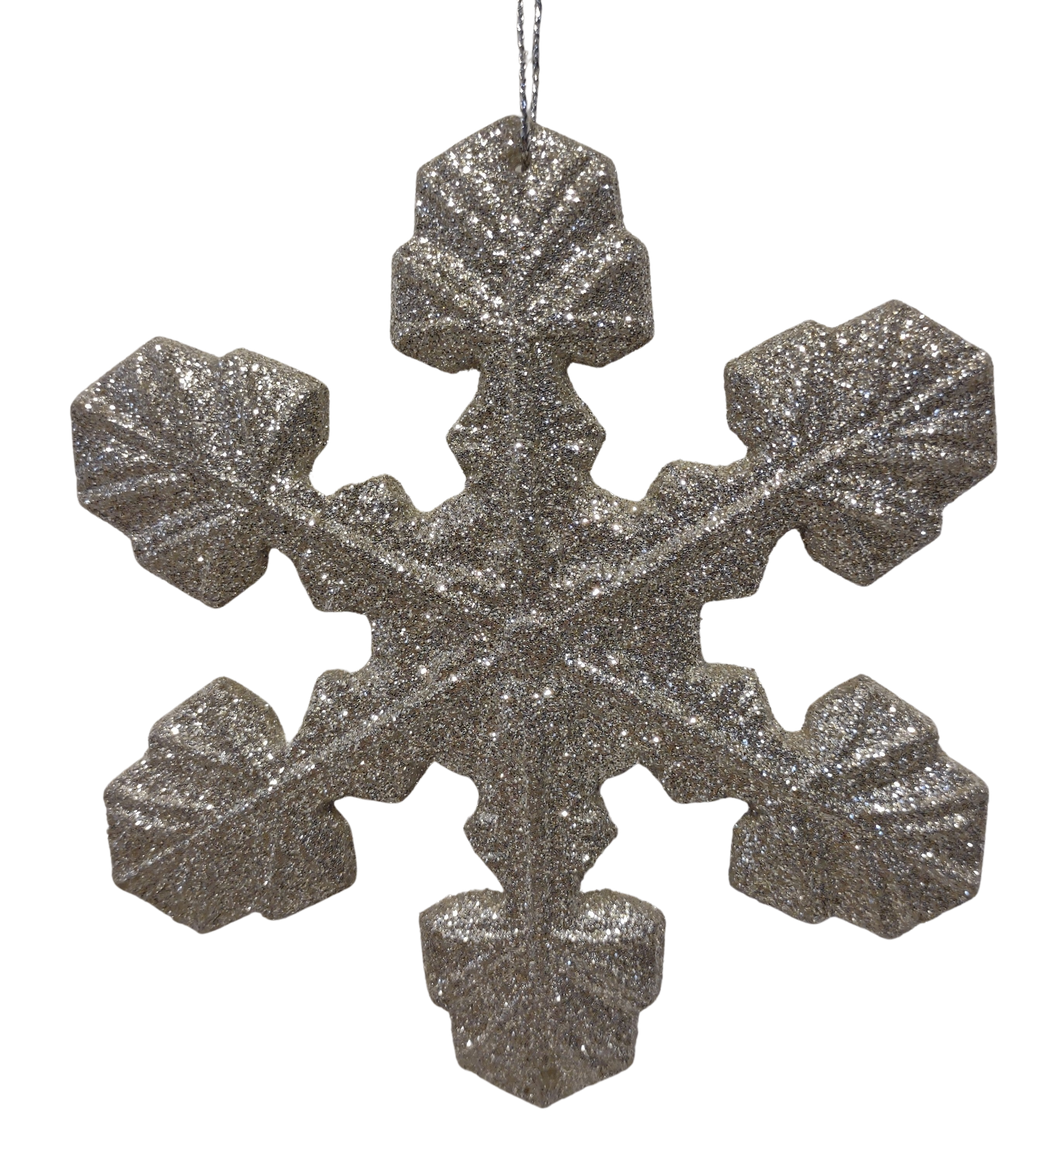 Acrylic Silver Snowflake Ornament with Glitter 4.5